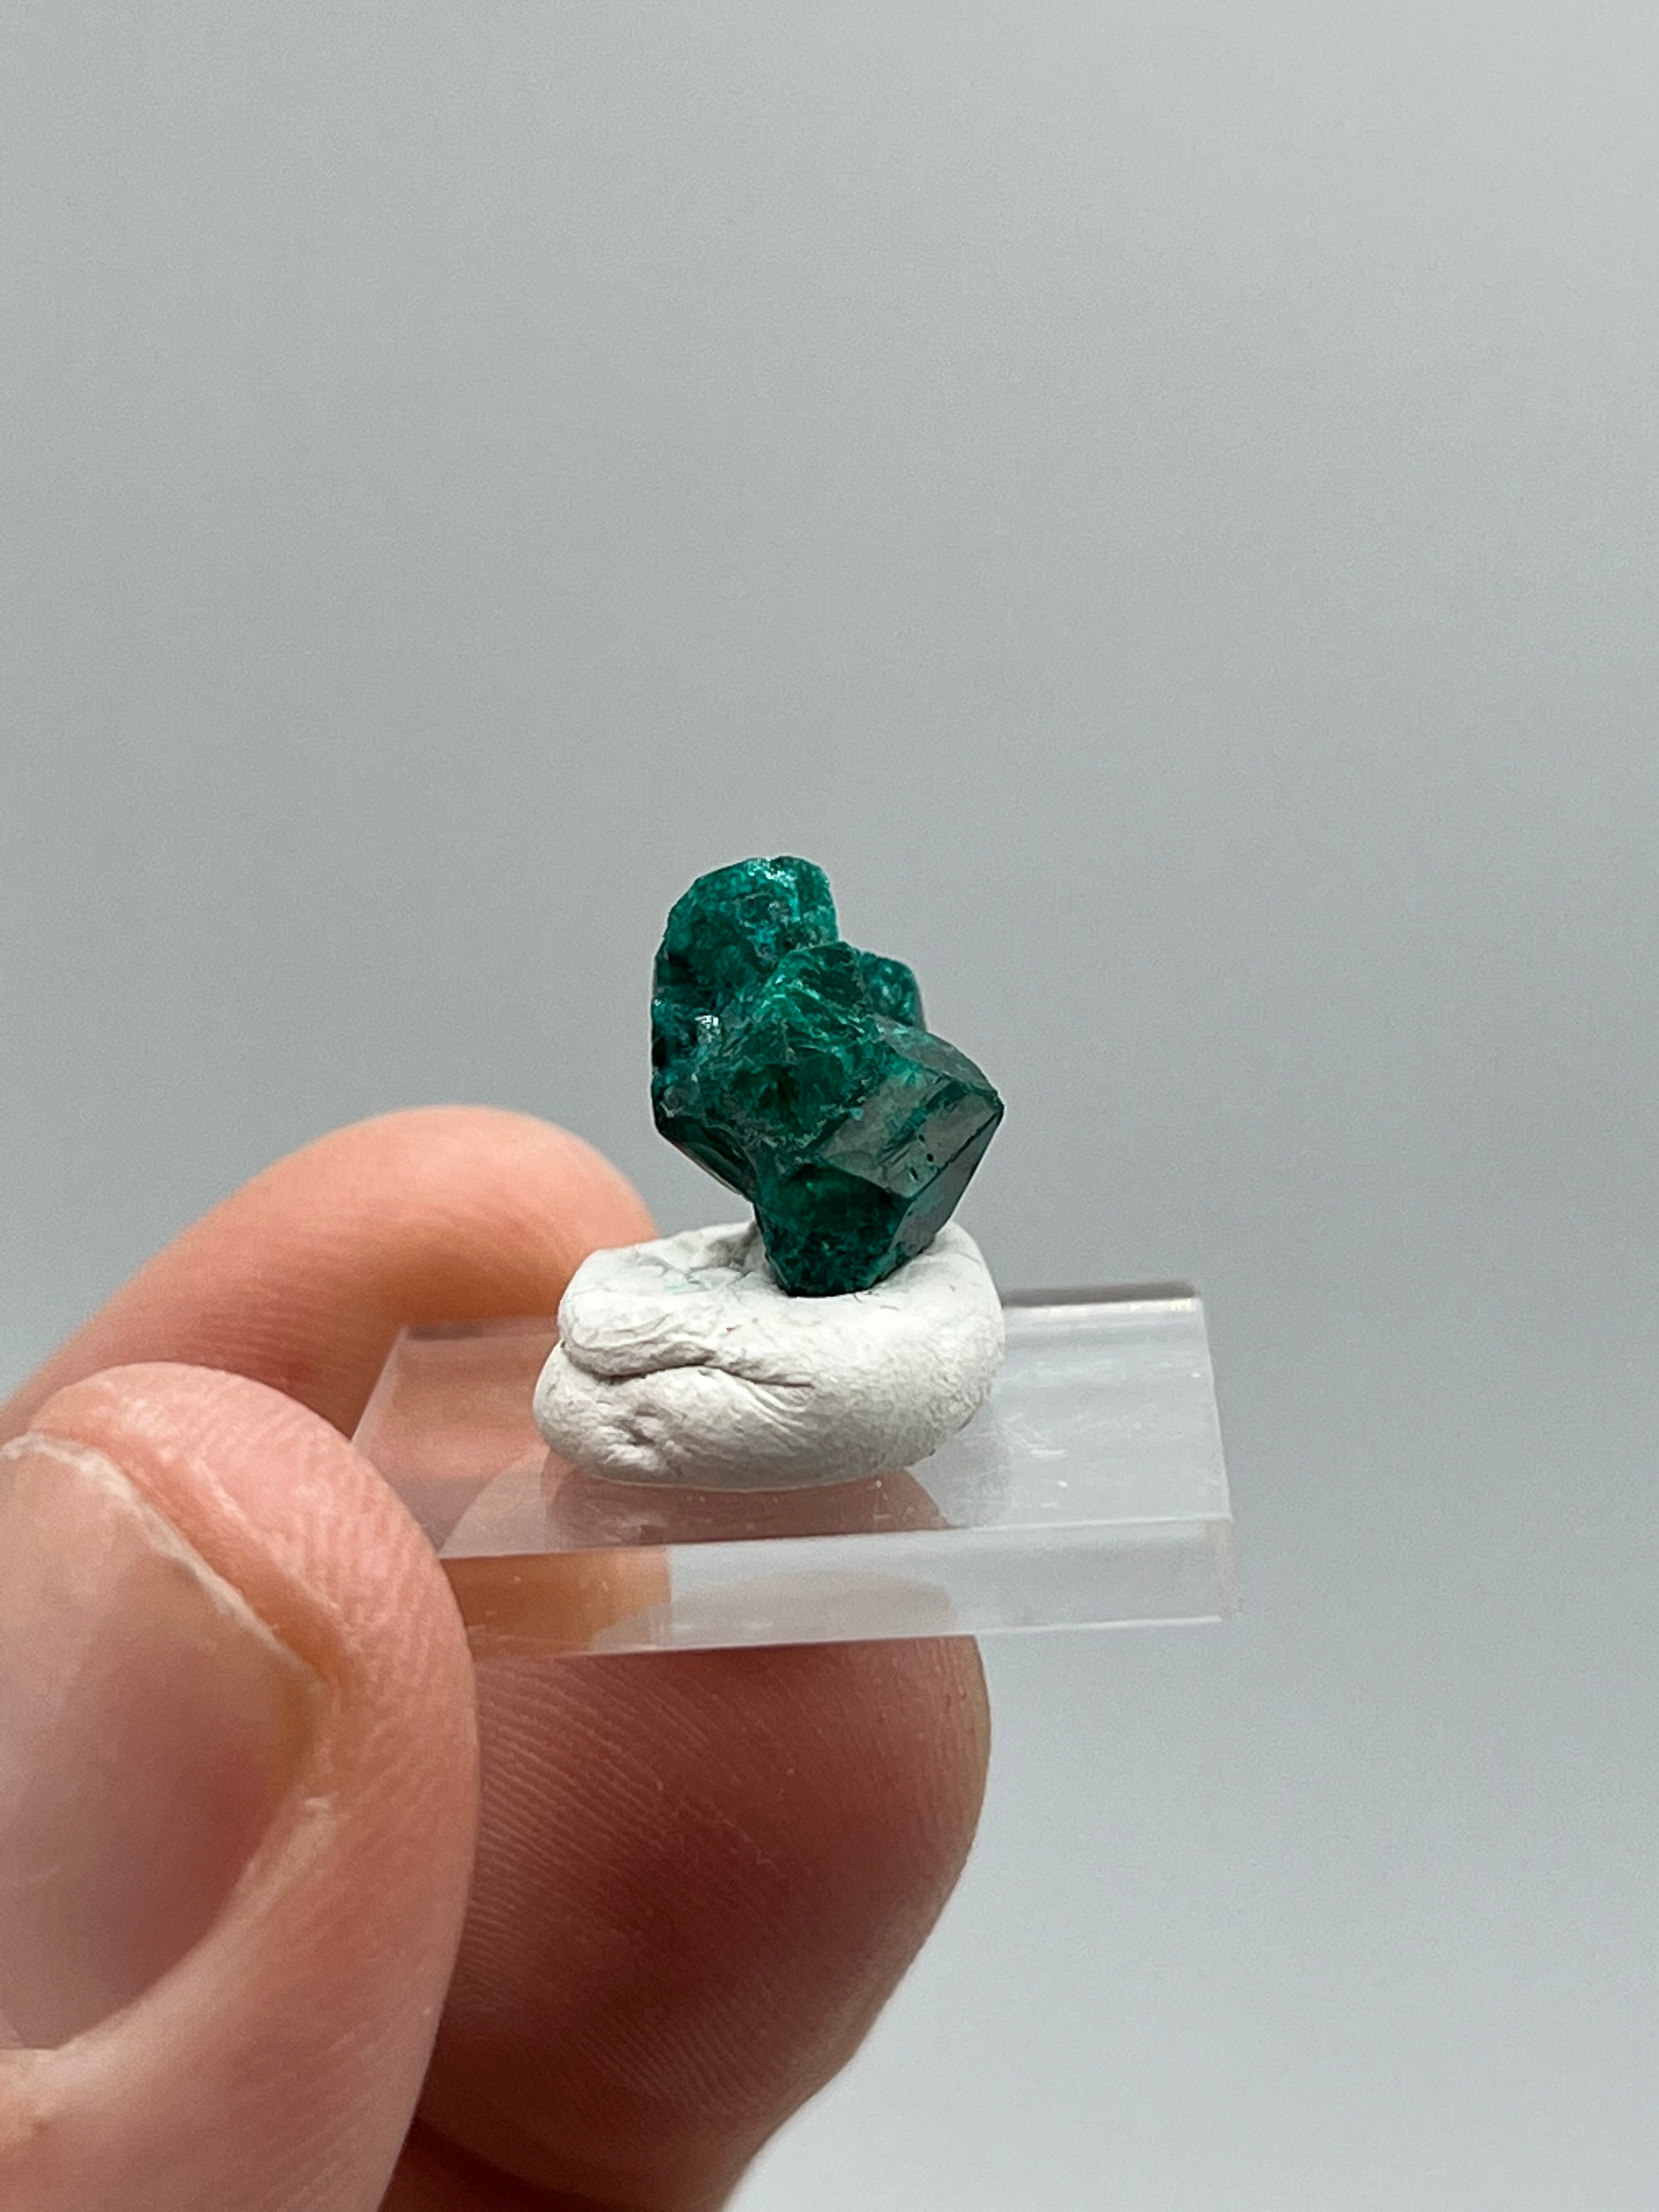 Dioptase D - Earthly Secrets